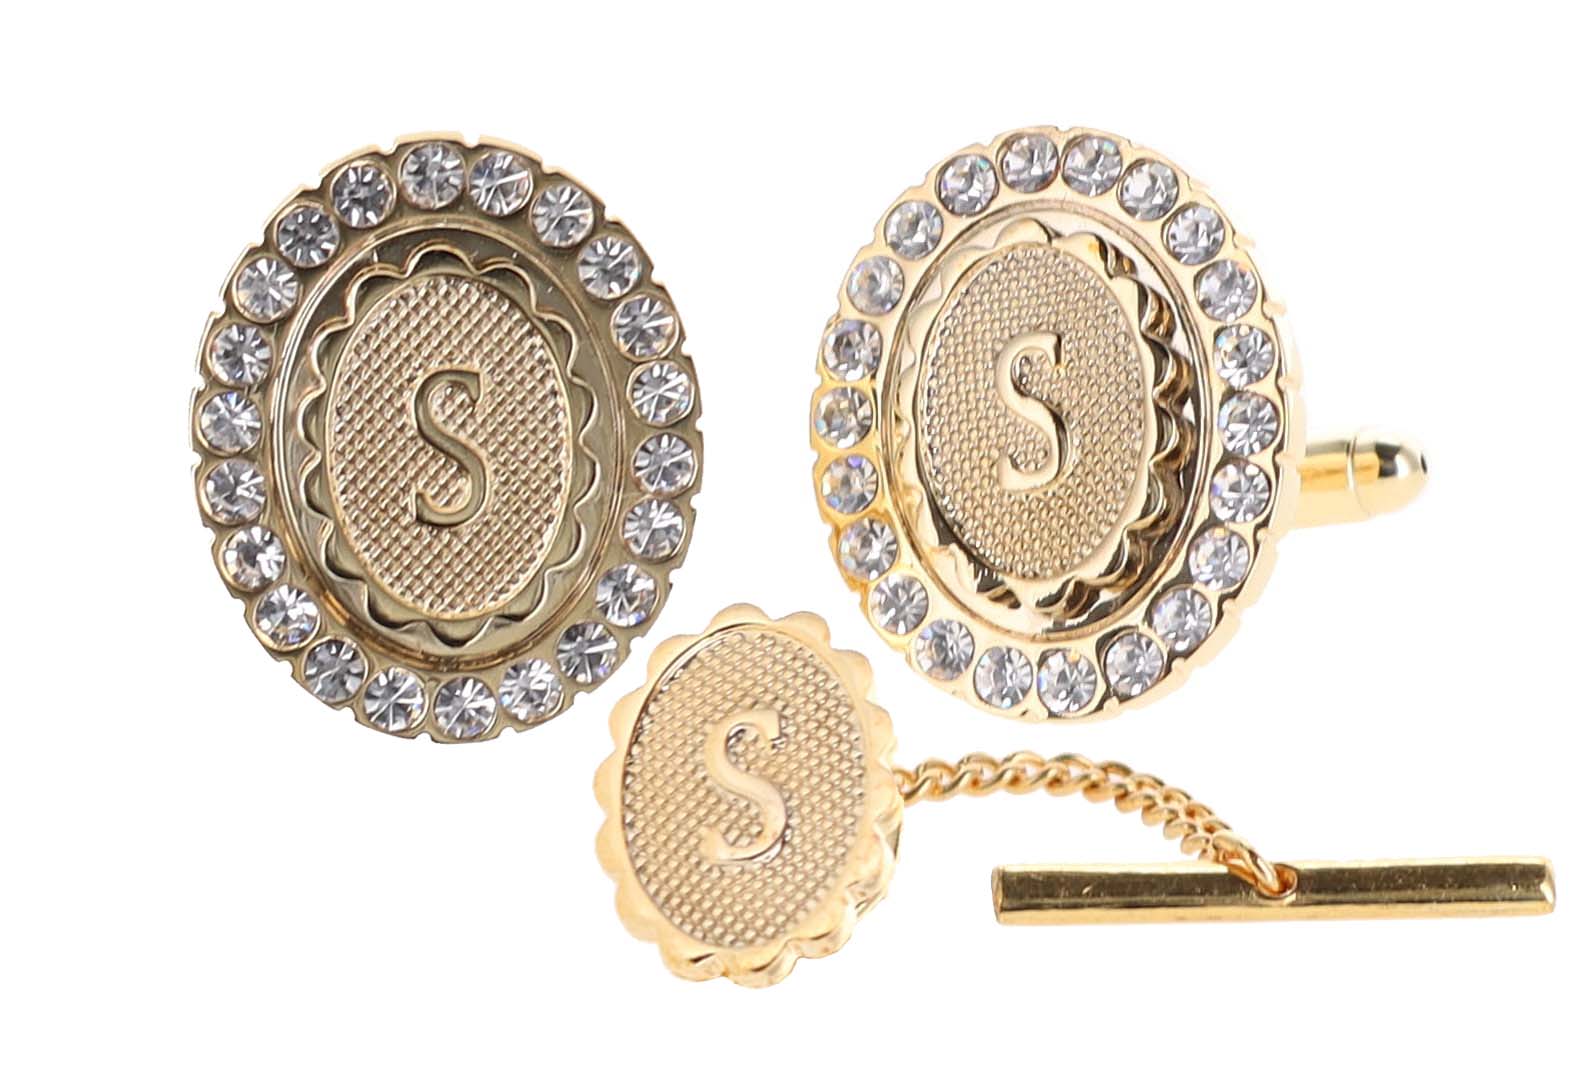 Vittorio Vico Bling Initial Cufflinks & Tie Tack Set: A to Z